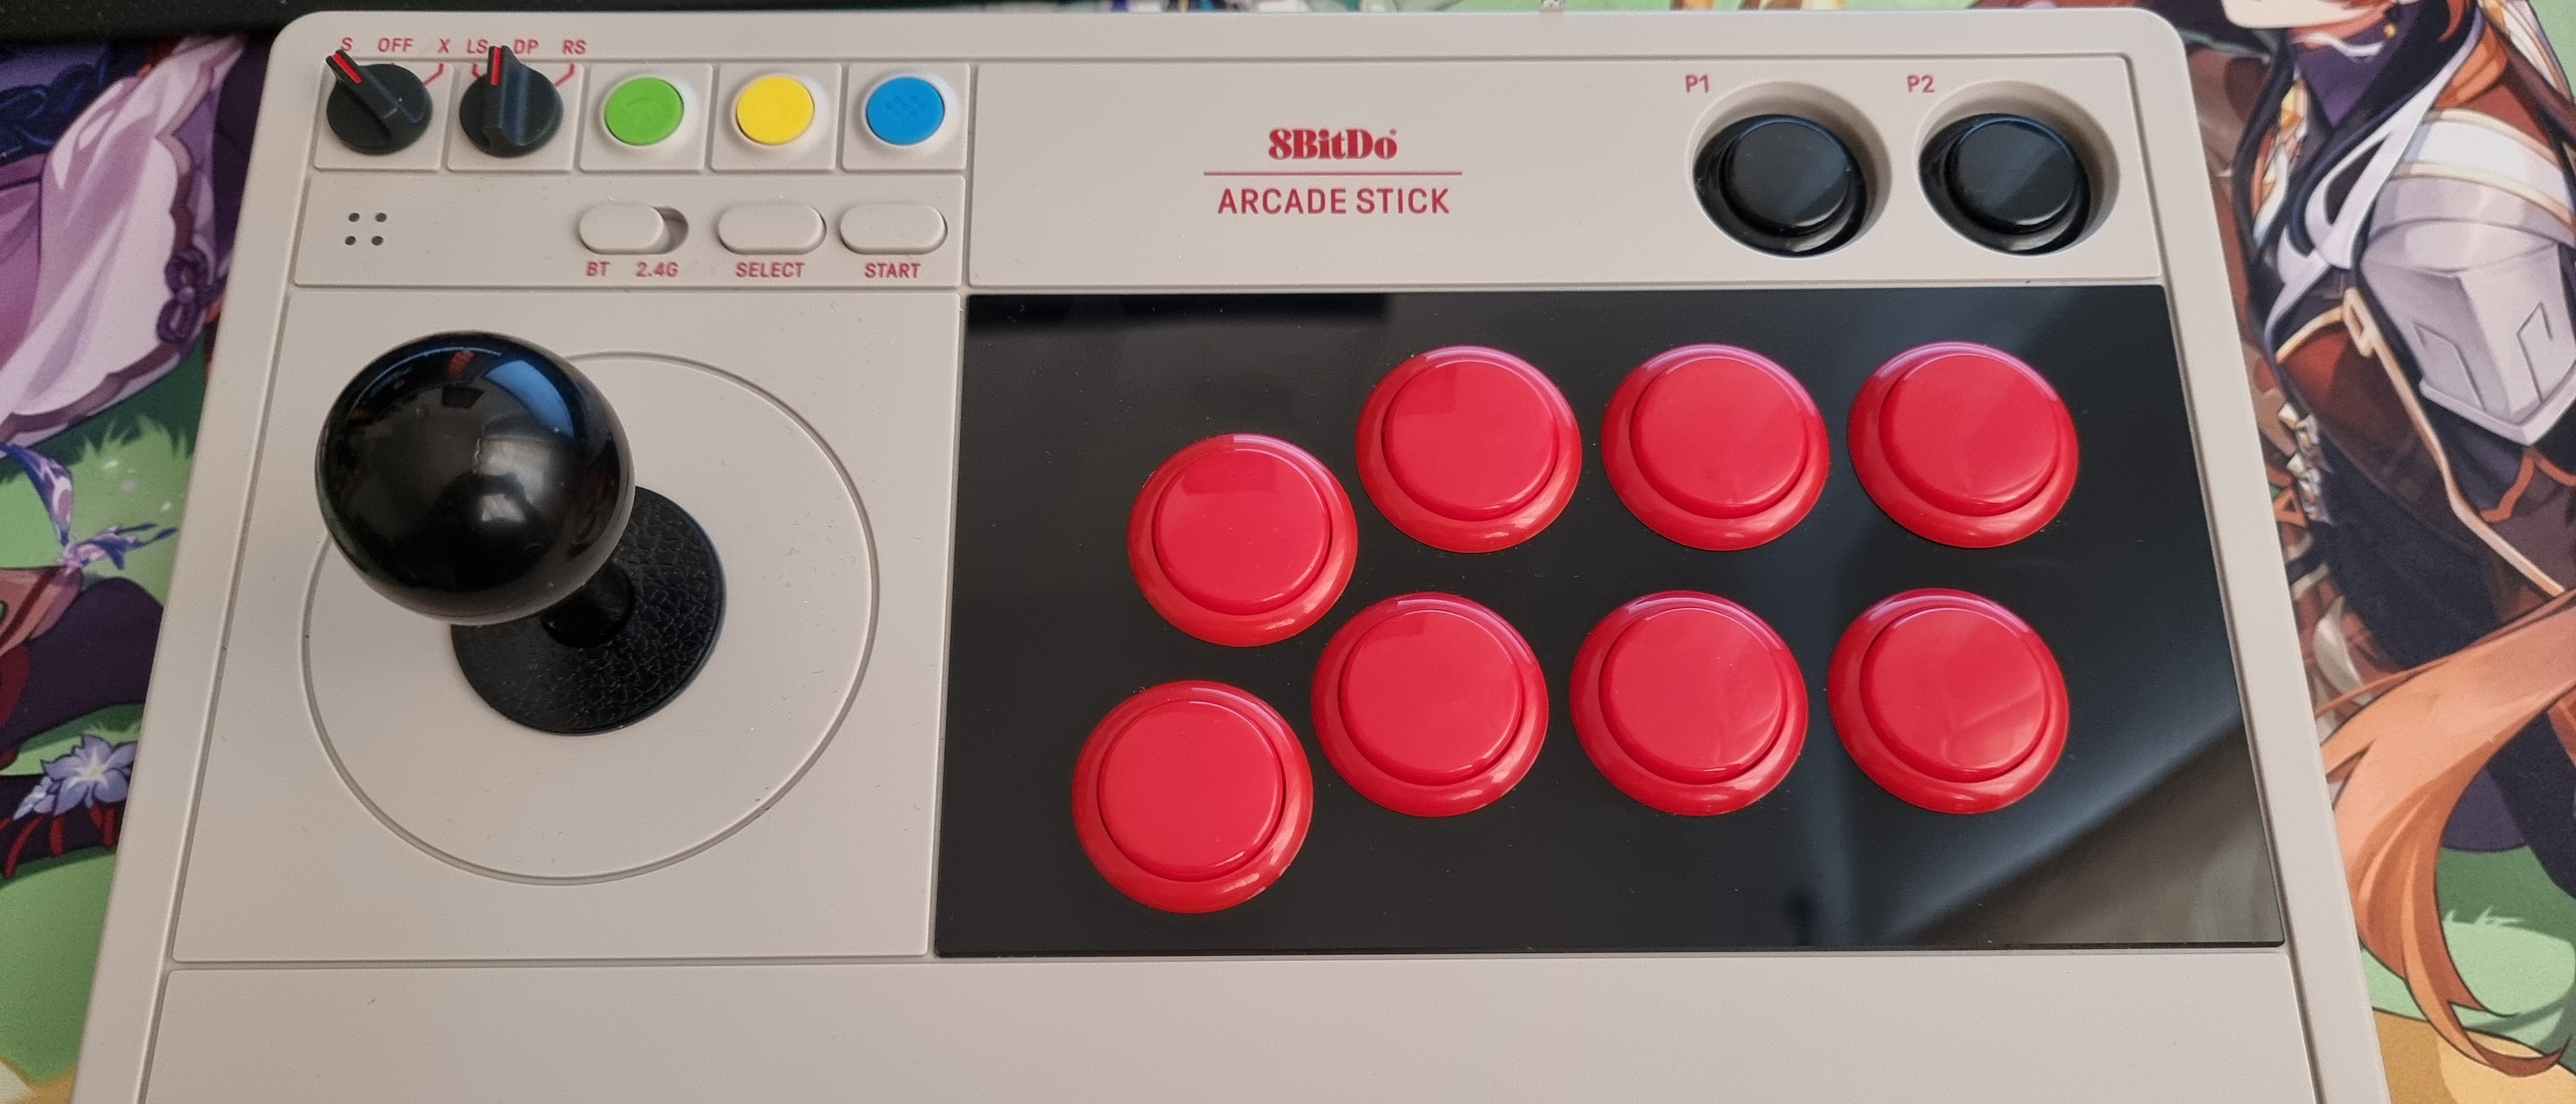 8BitDo Arcade Stick review - simply one of the best mid-range